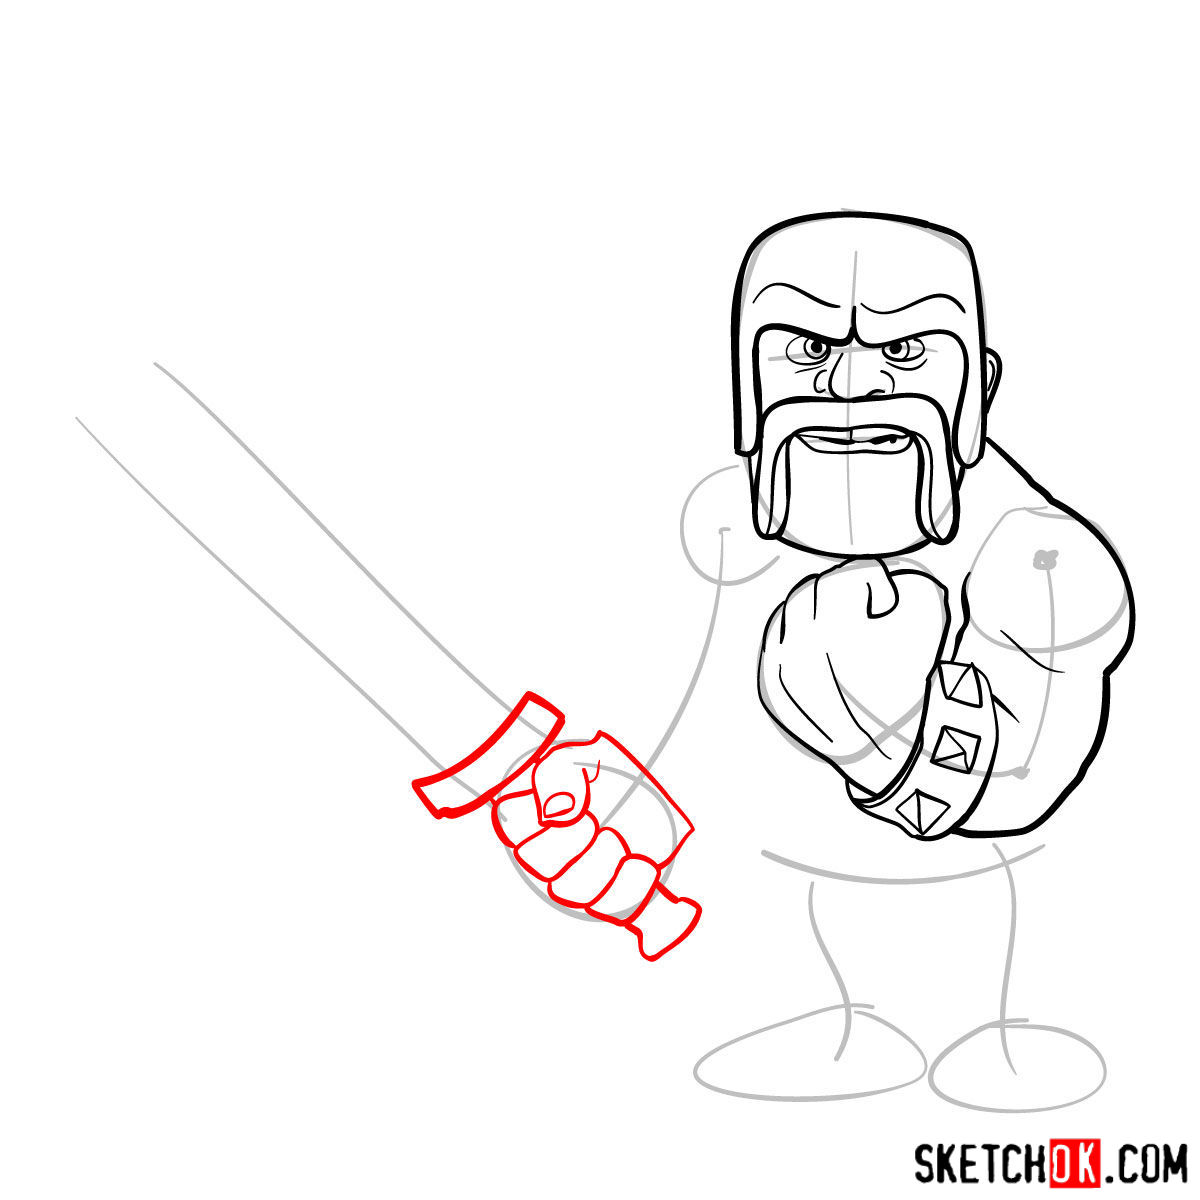 How to draw Barbarian from Clash of Clans - step 07